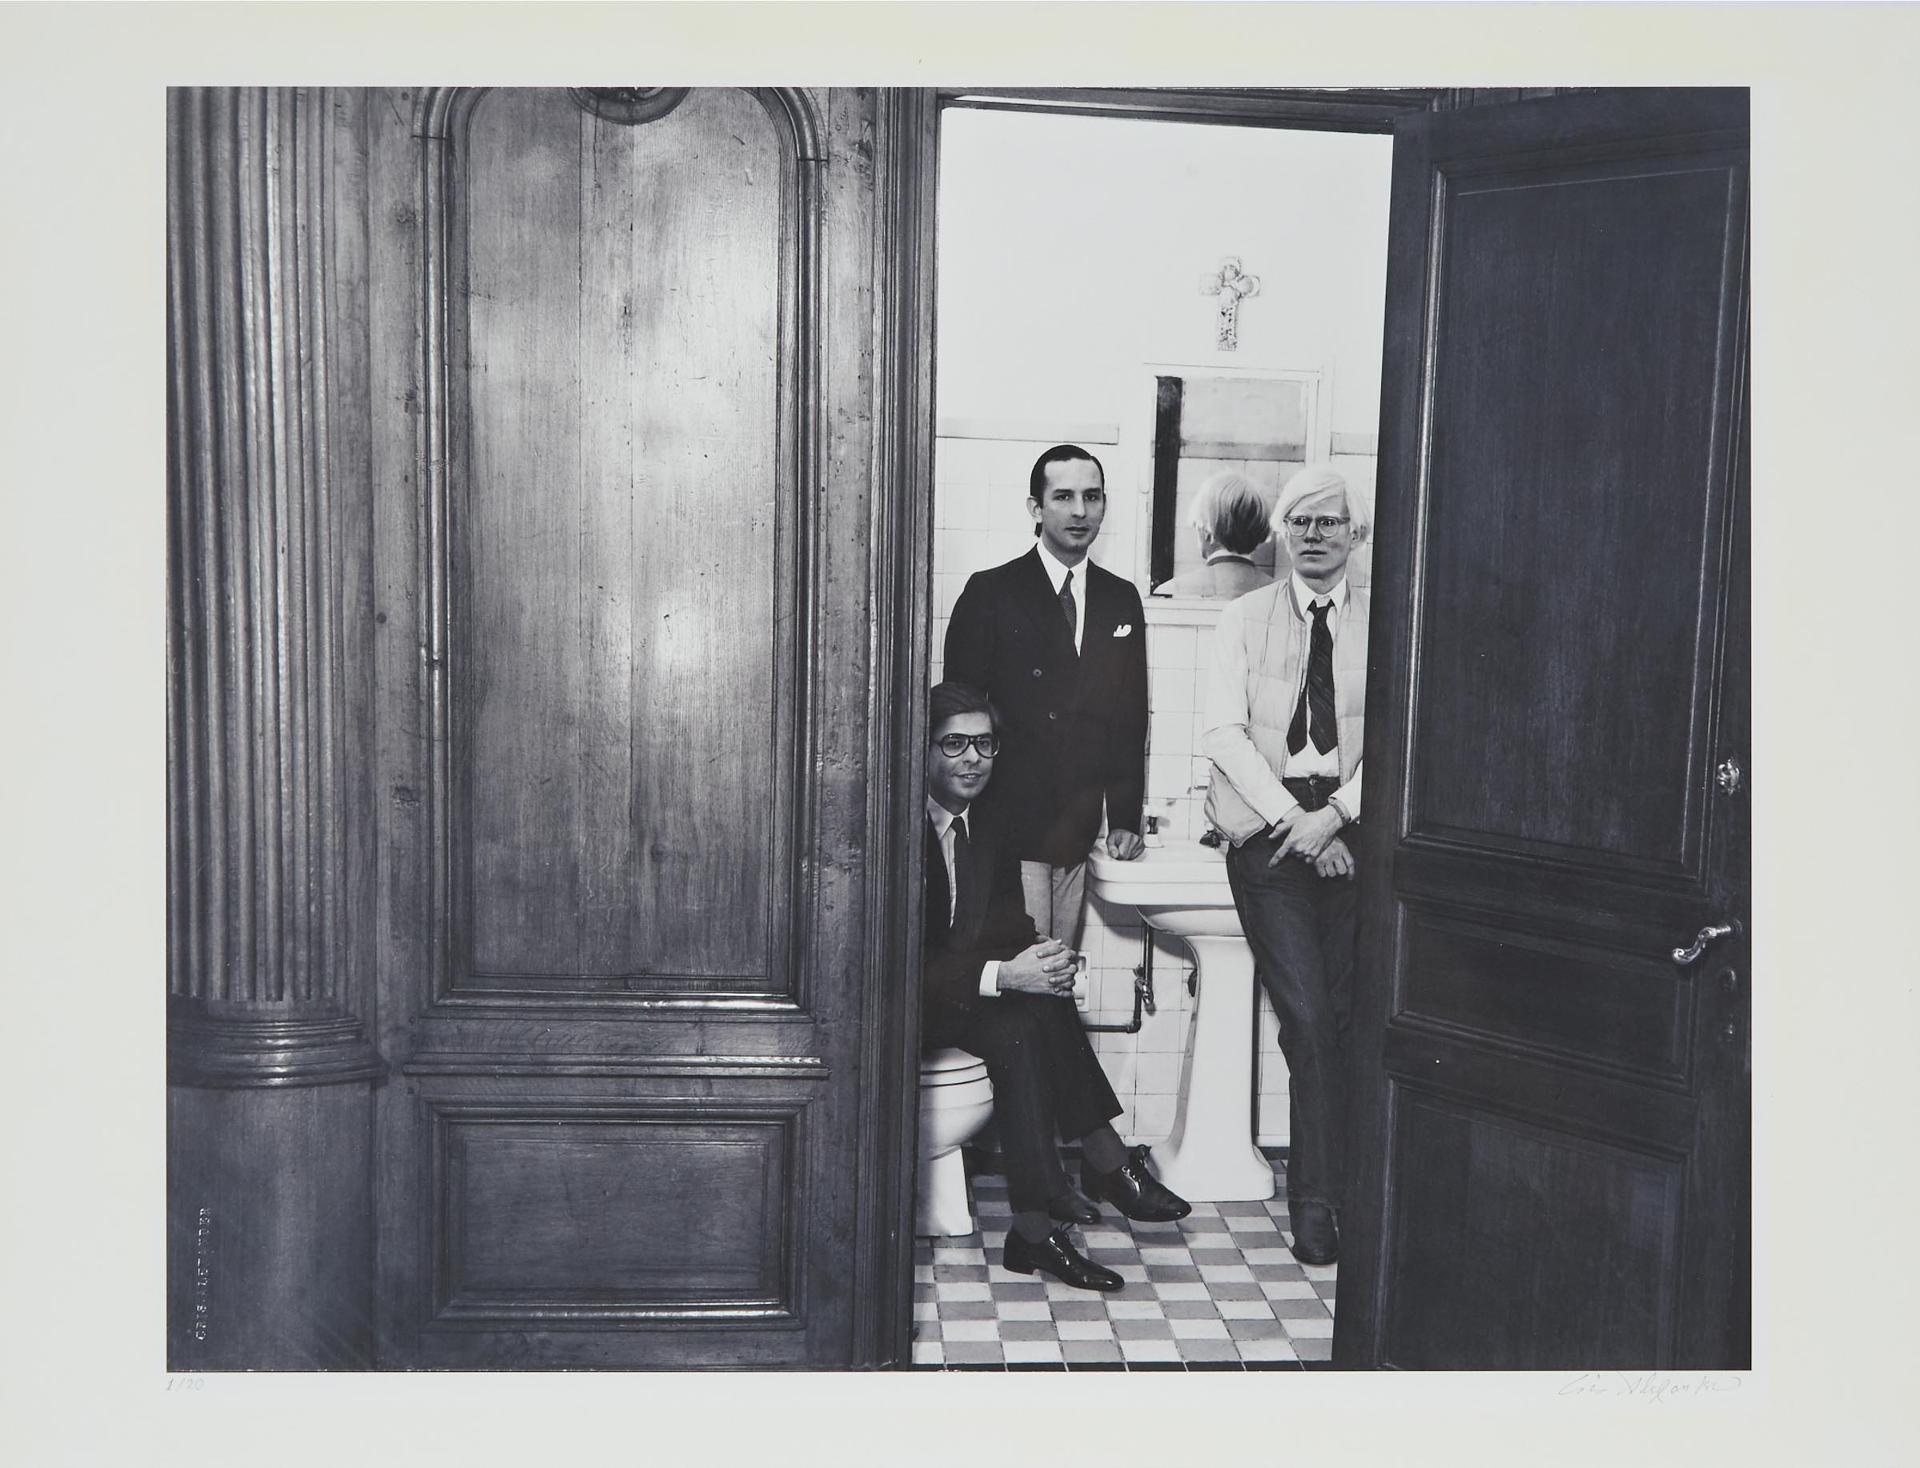 Cris Alexander - Andy Warhol, Fred Hughes And Bob Colacello In A Washroom